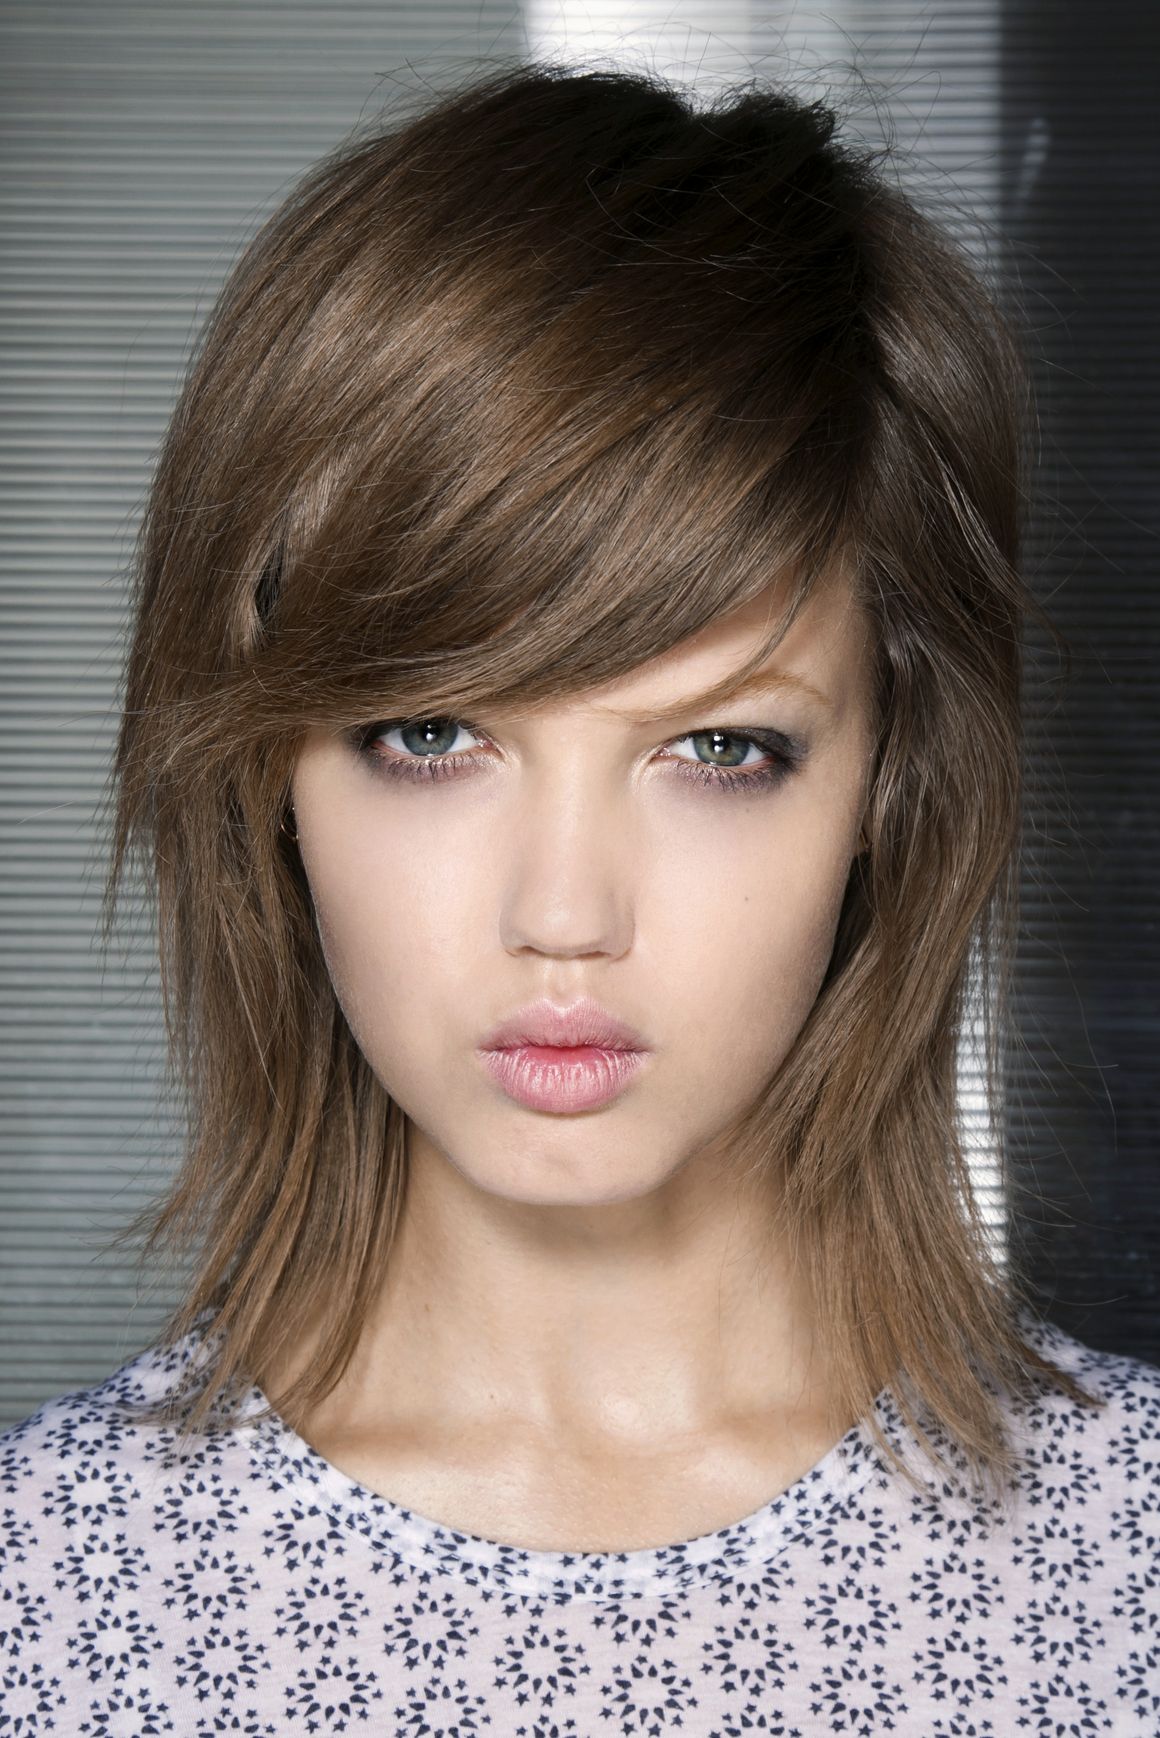 Cute Short Haircuts With Side Bangs Pertaining To Short Haircuts With Side Bangs (View 14 of 25)